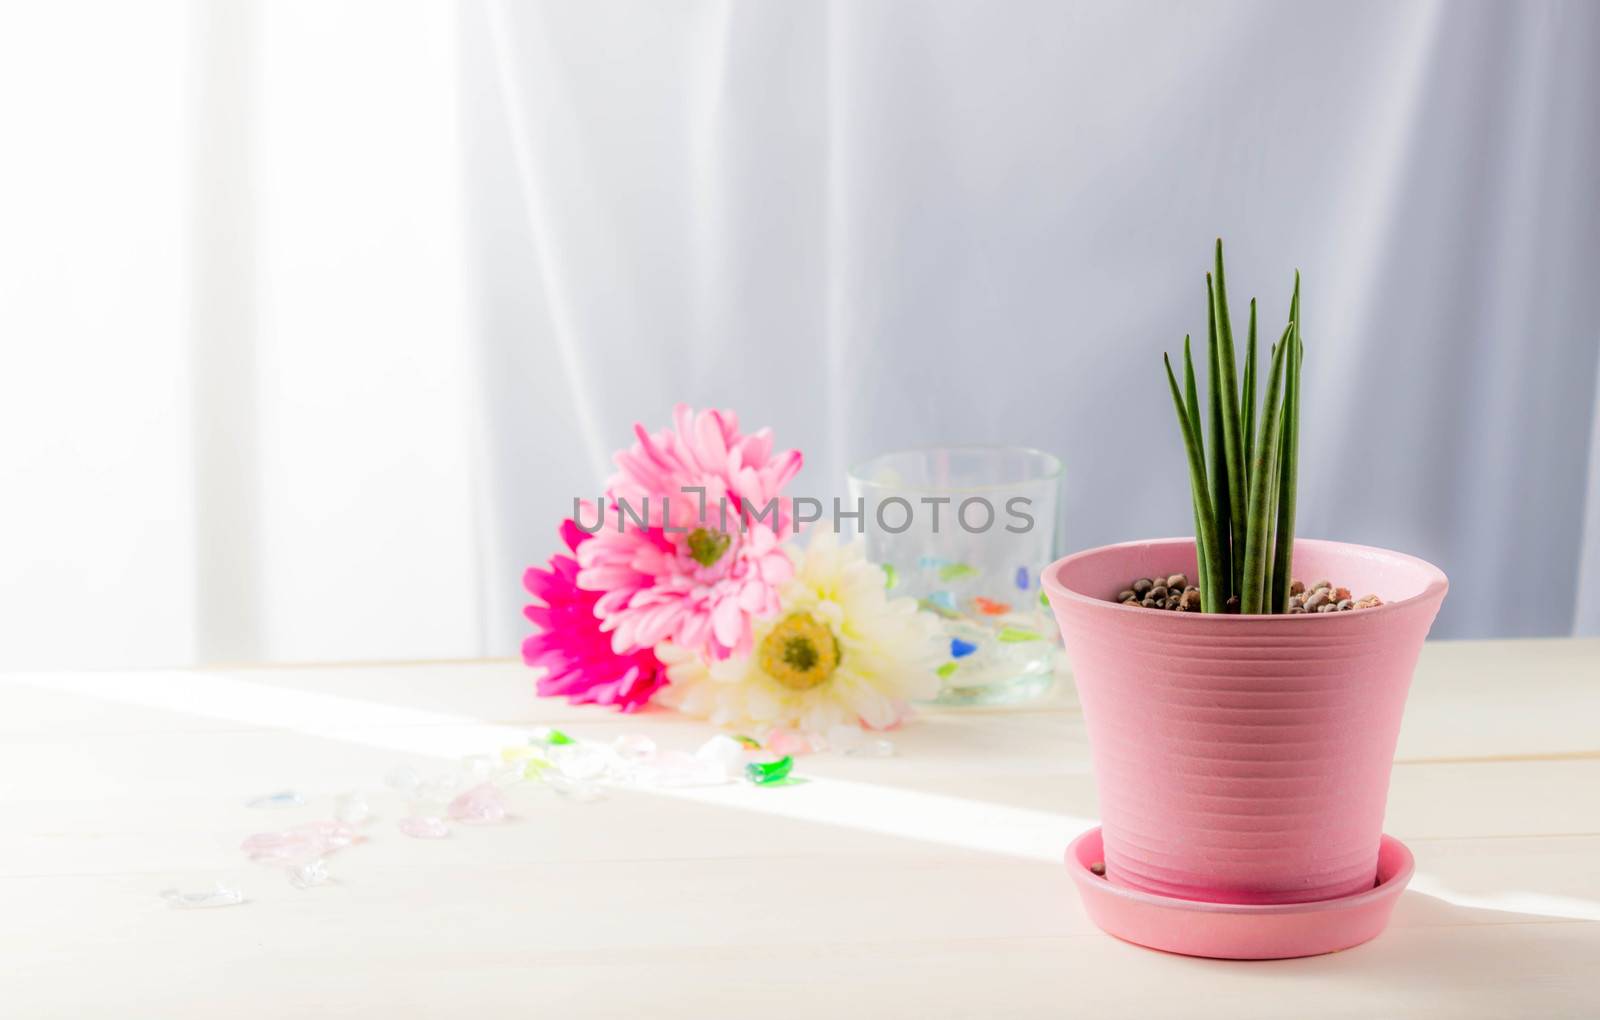 Sansevieria Stucky planted in a pink pot with gerbera on table at the window.